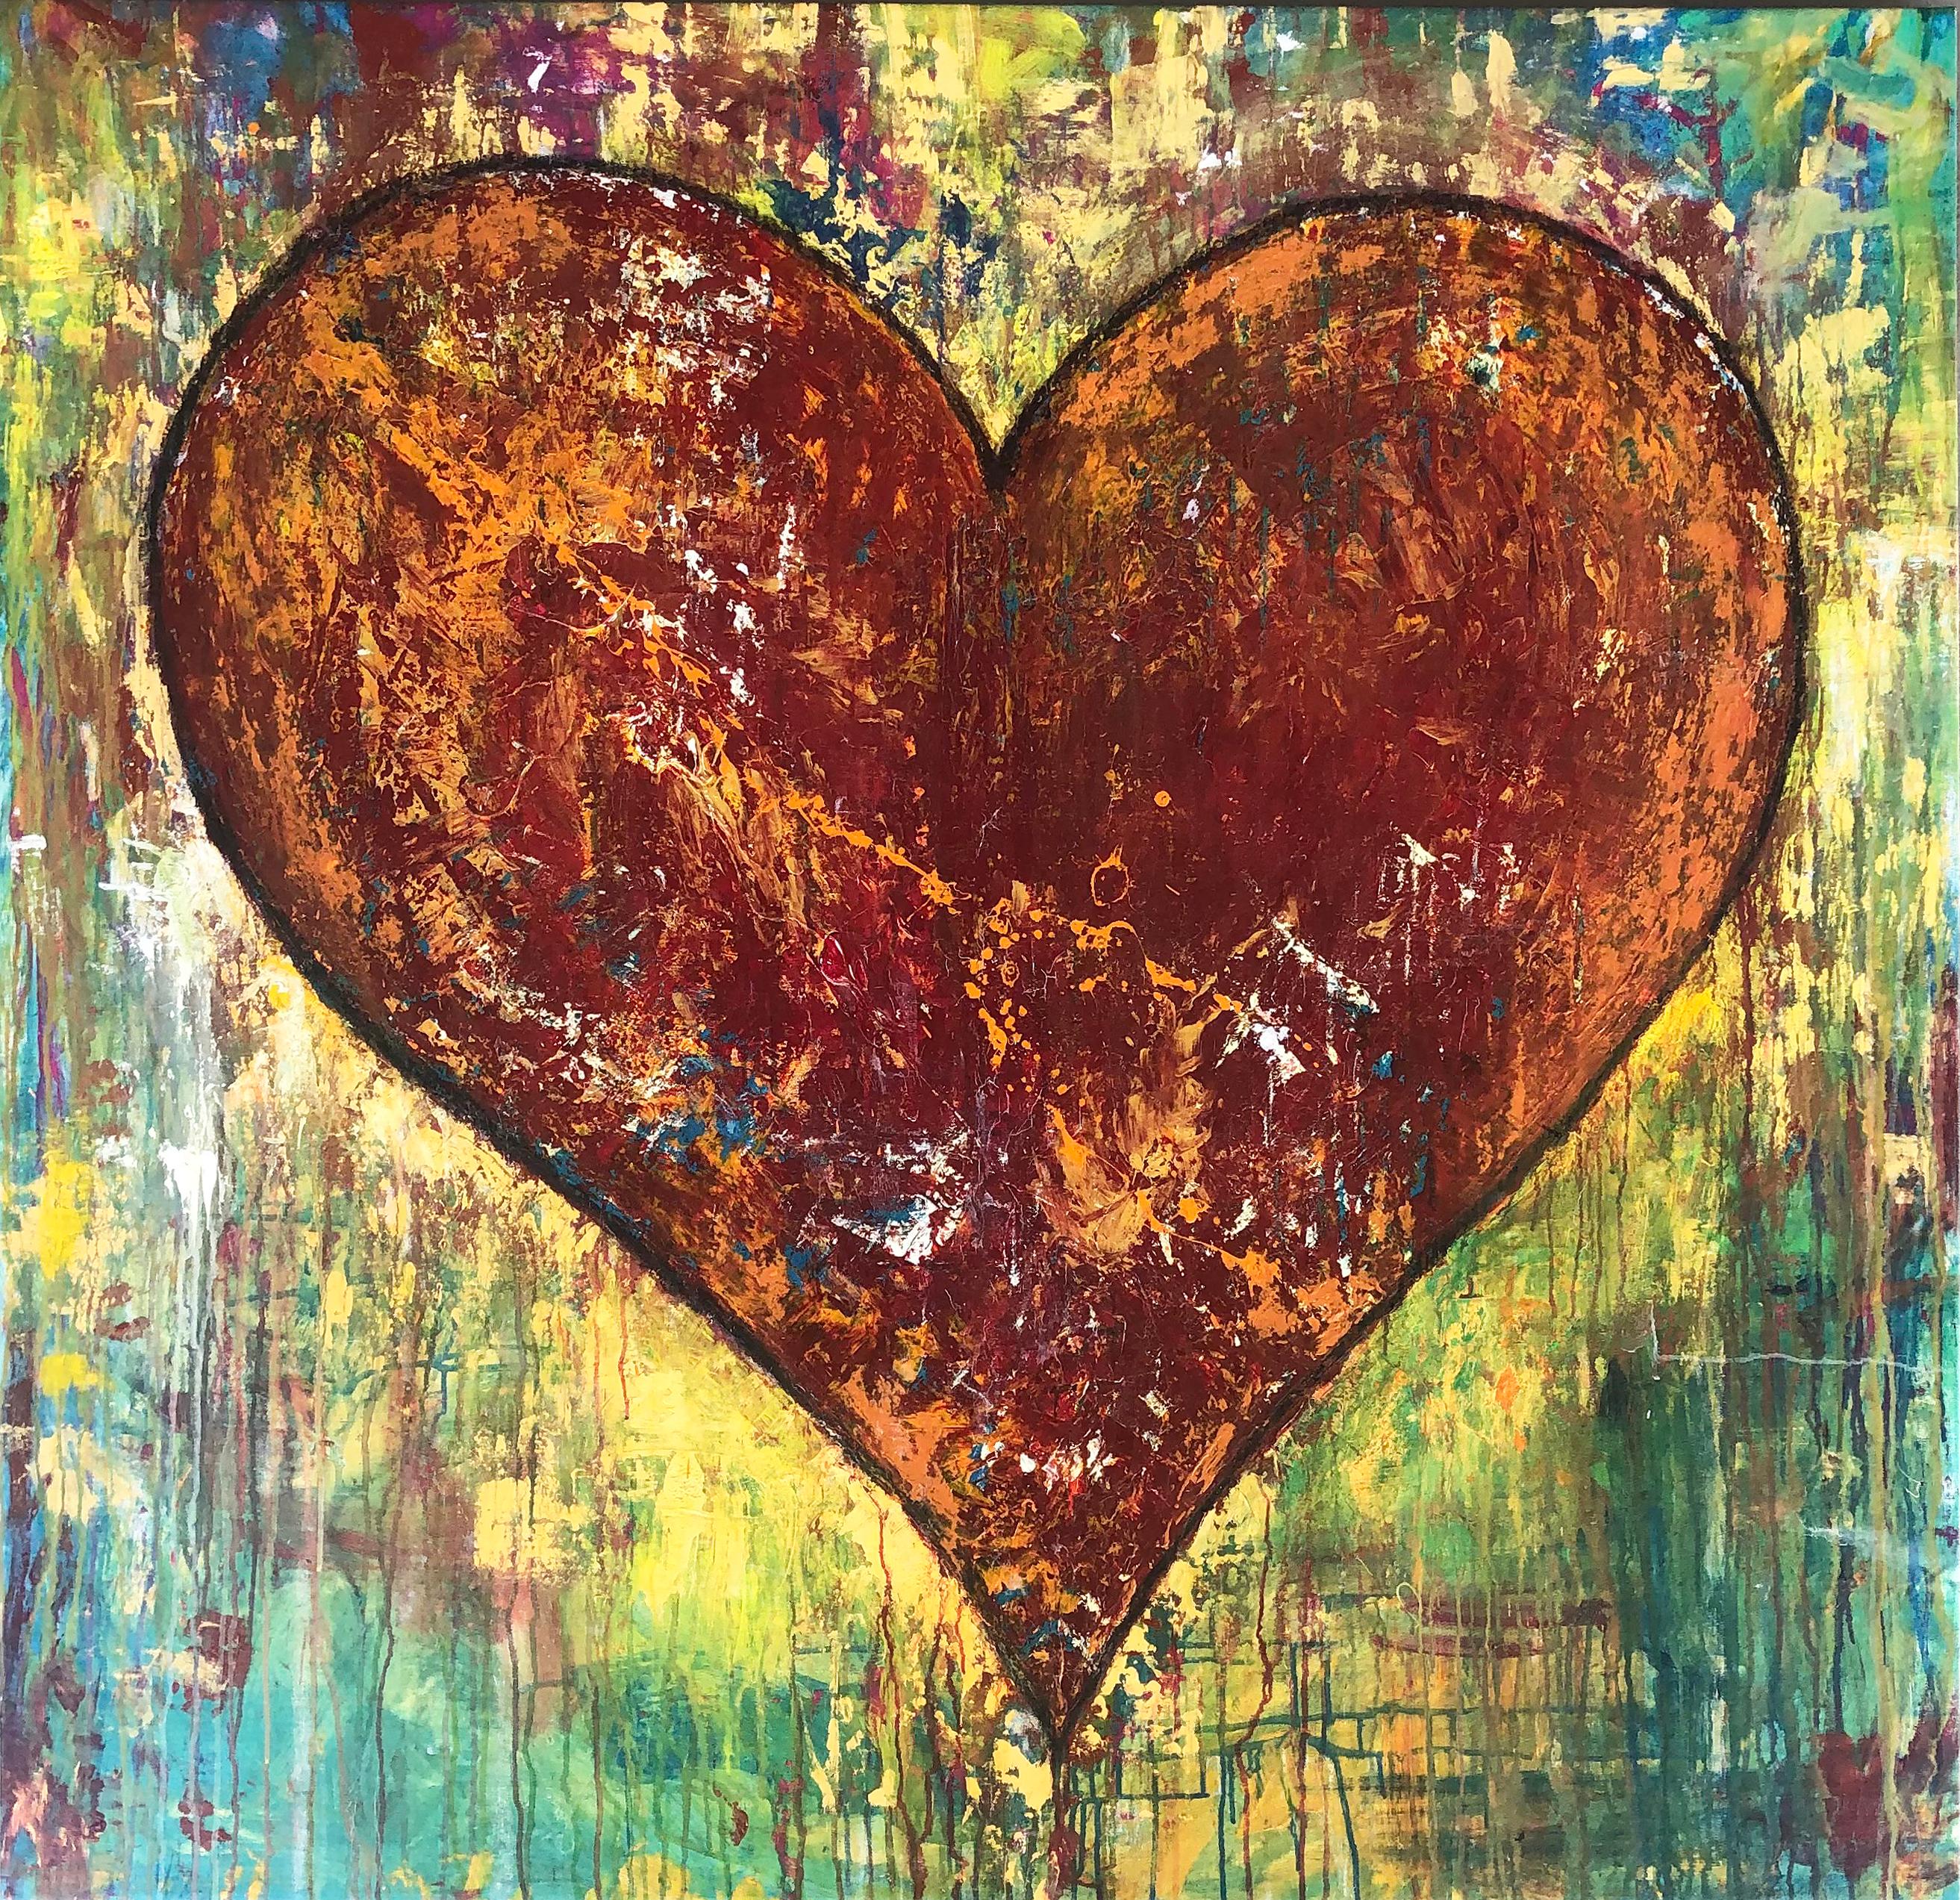  Large Vintage Cristina Dalcomune Abstract Heart Painting, Signed & Dated 2016 In Good Condition For Sale In Miami, FL